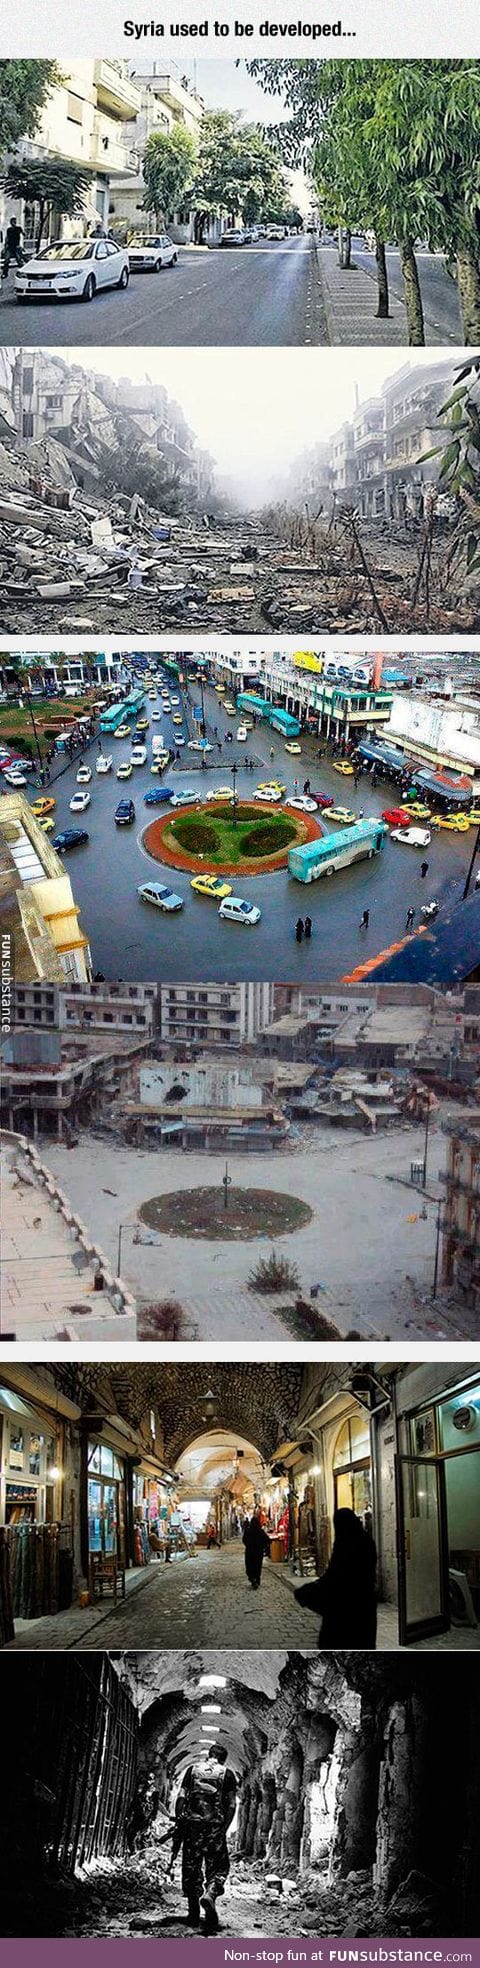 Syria used to be a beautiful city